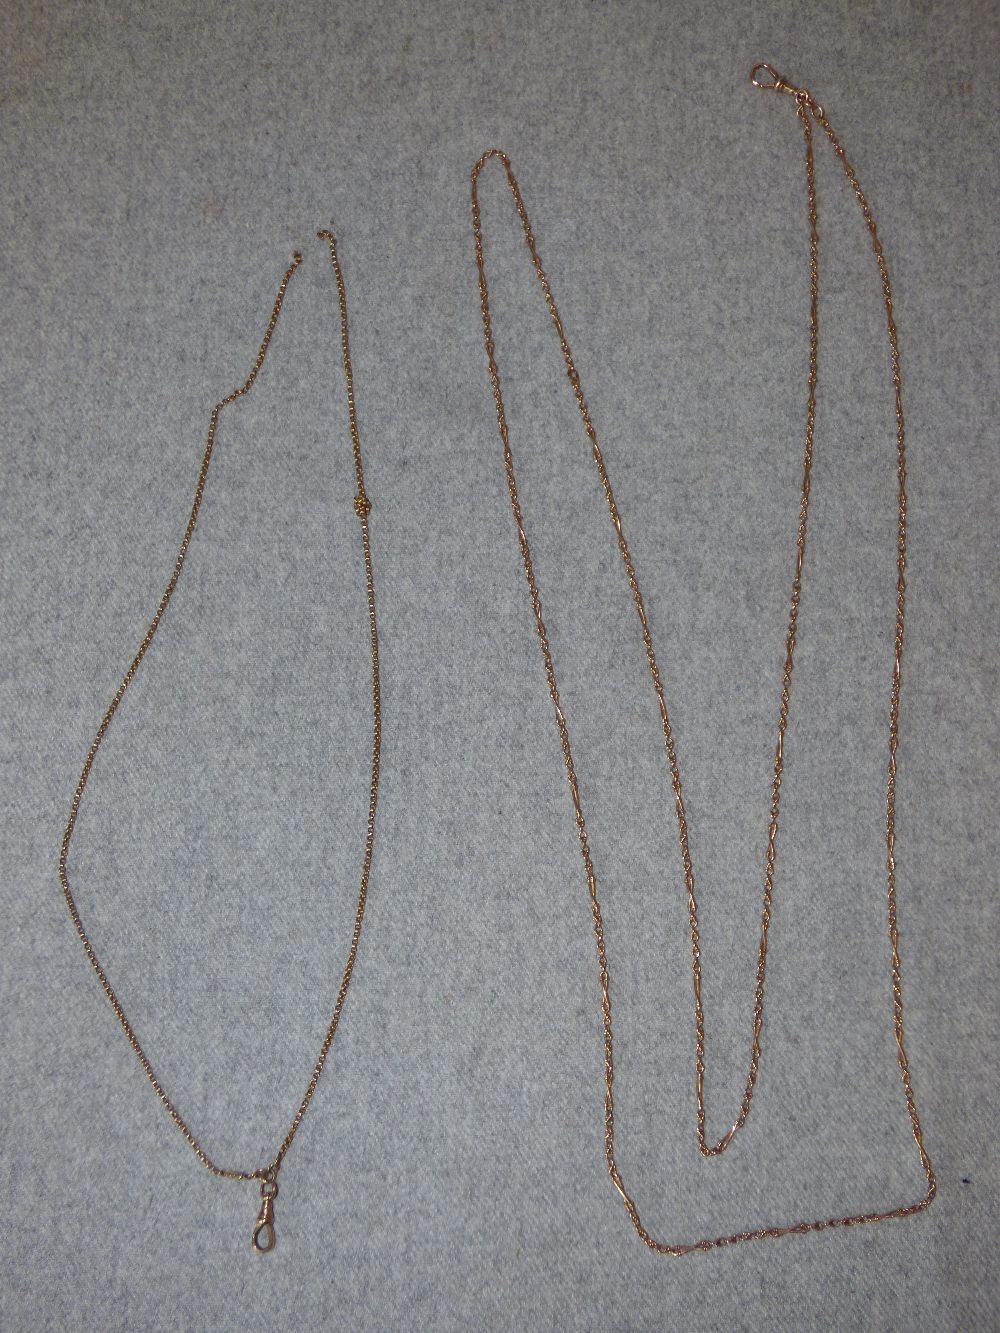 Long chain, tagged '9c', of fancy links, 143 cm long, 22.6g gross; with a past guard chain,